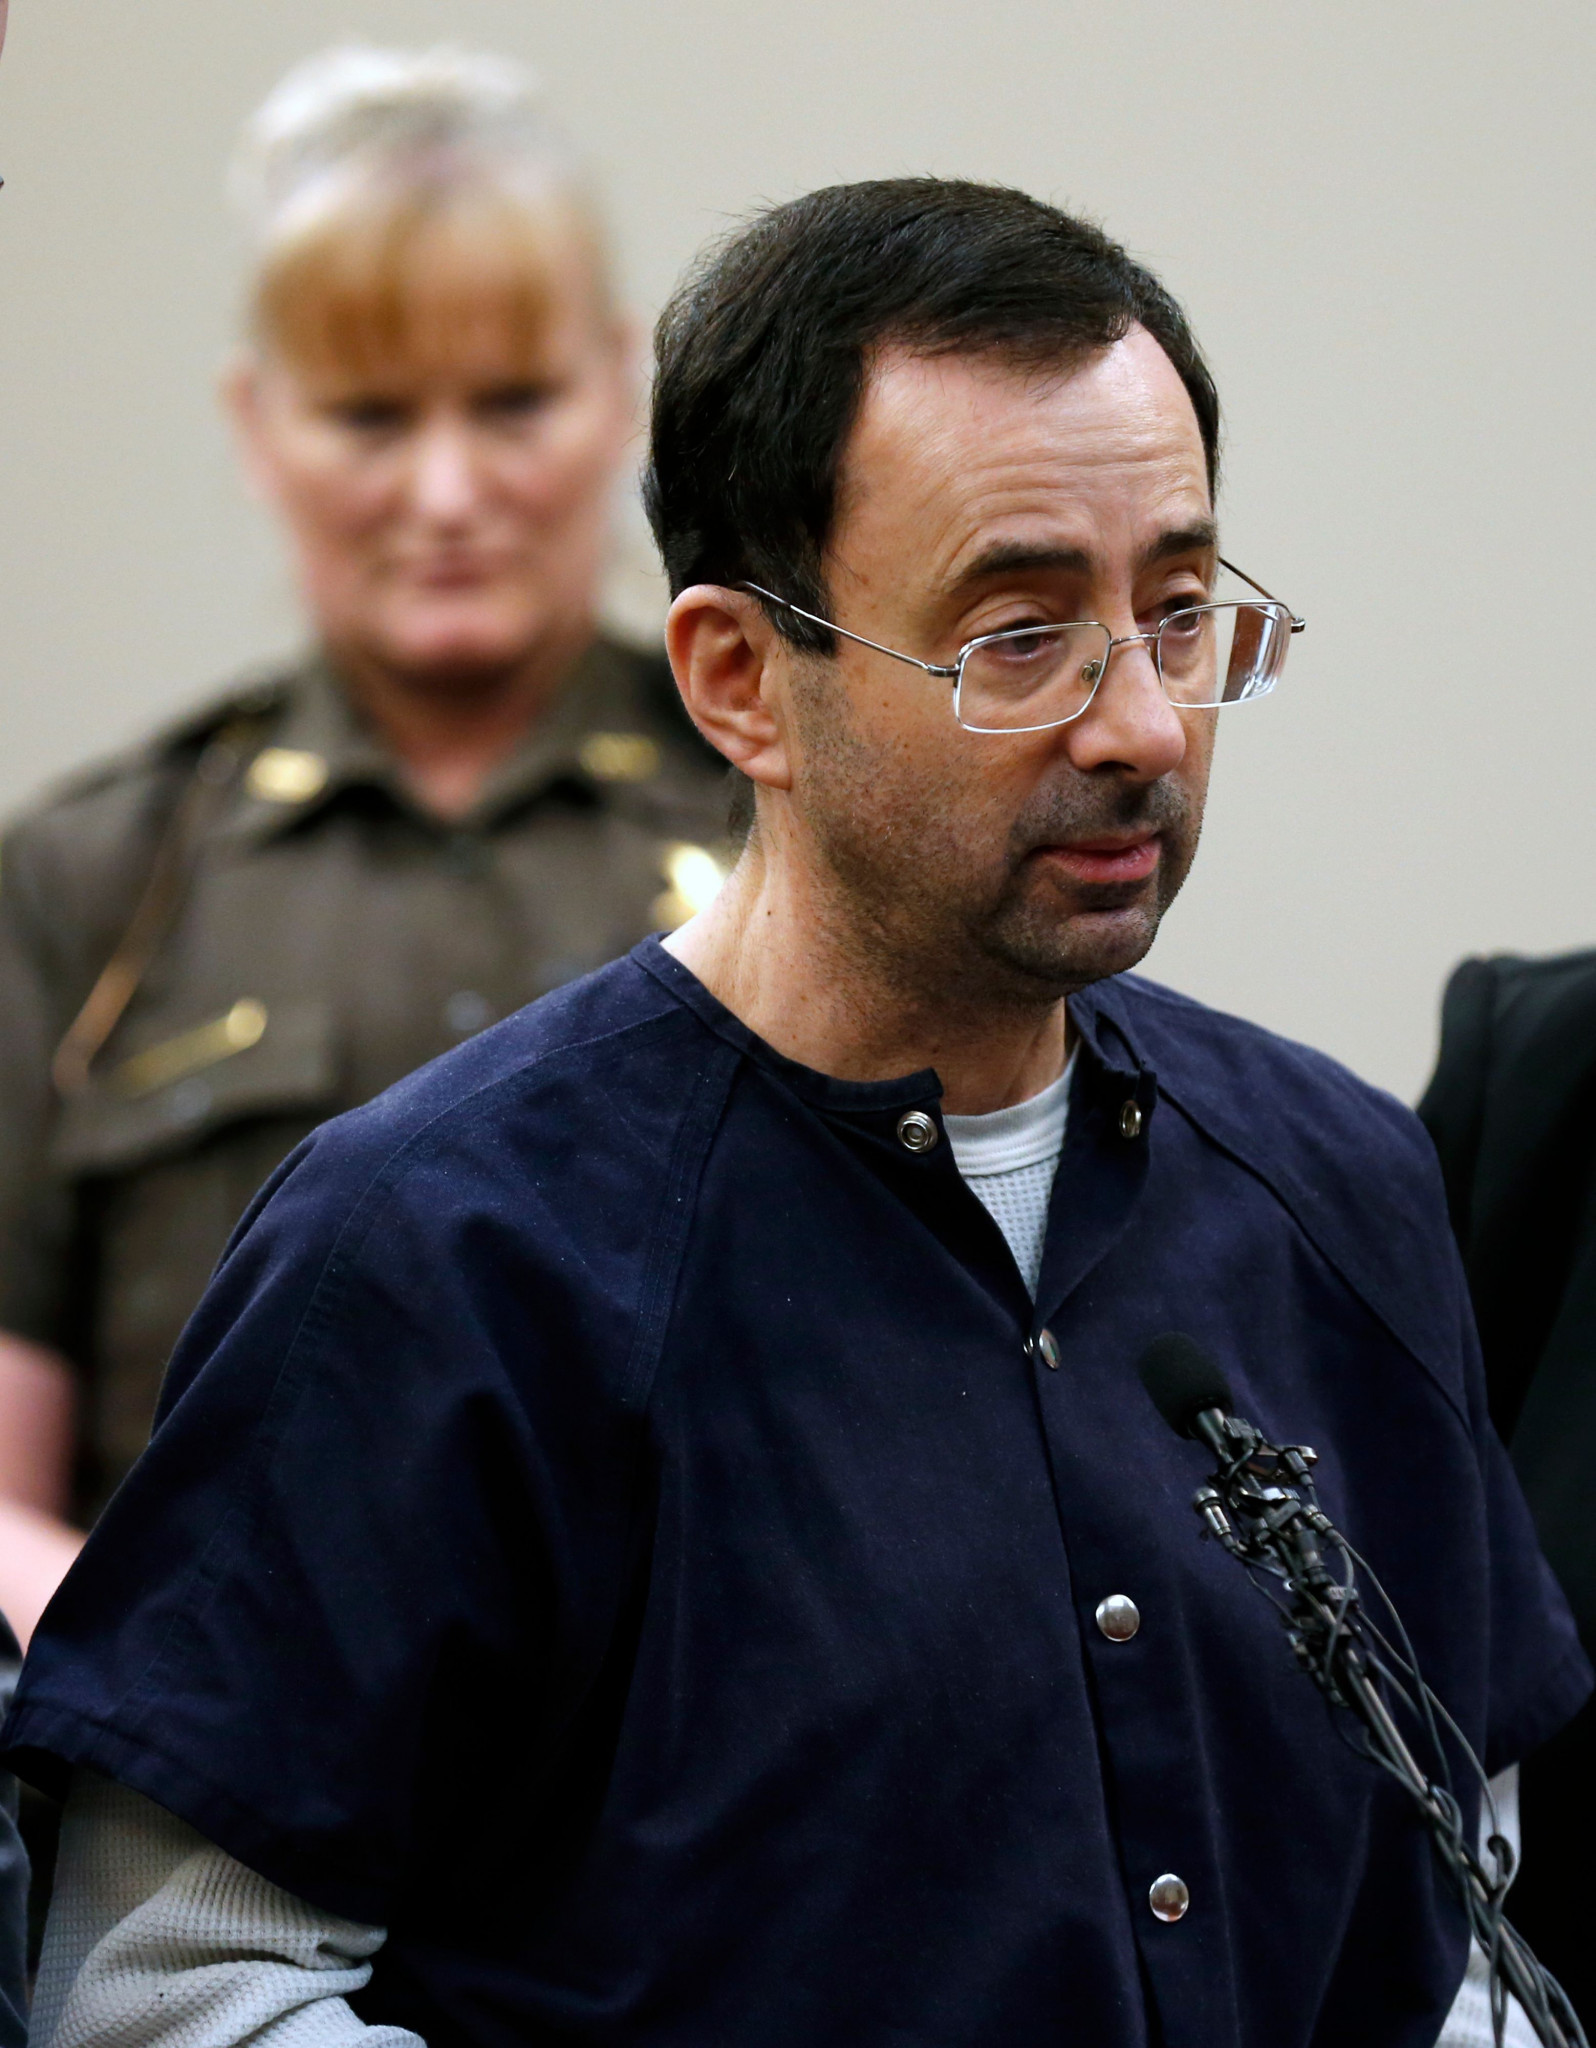 Larry Nassar showed little remorse when being sentenced last week in Lansing, Michigan ©Getty Images